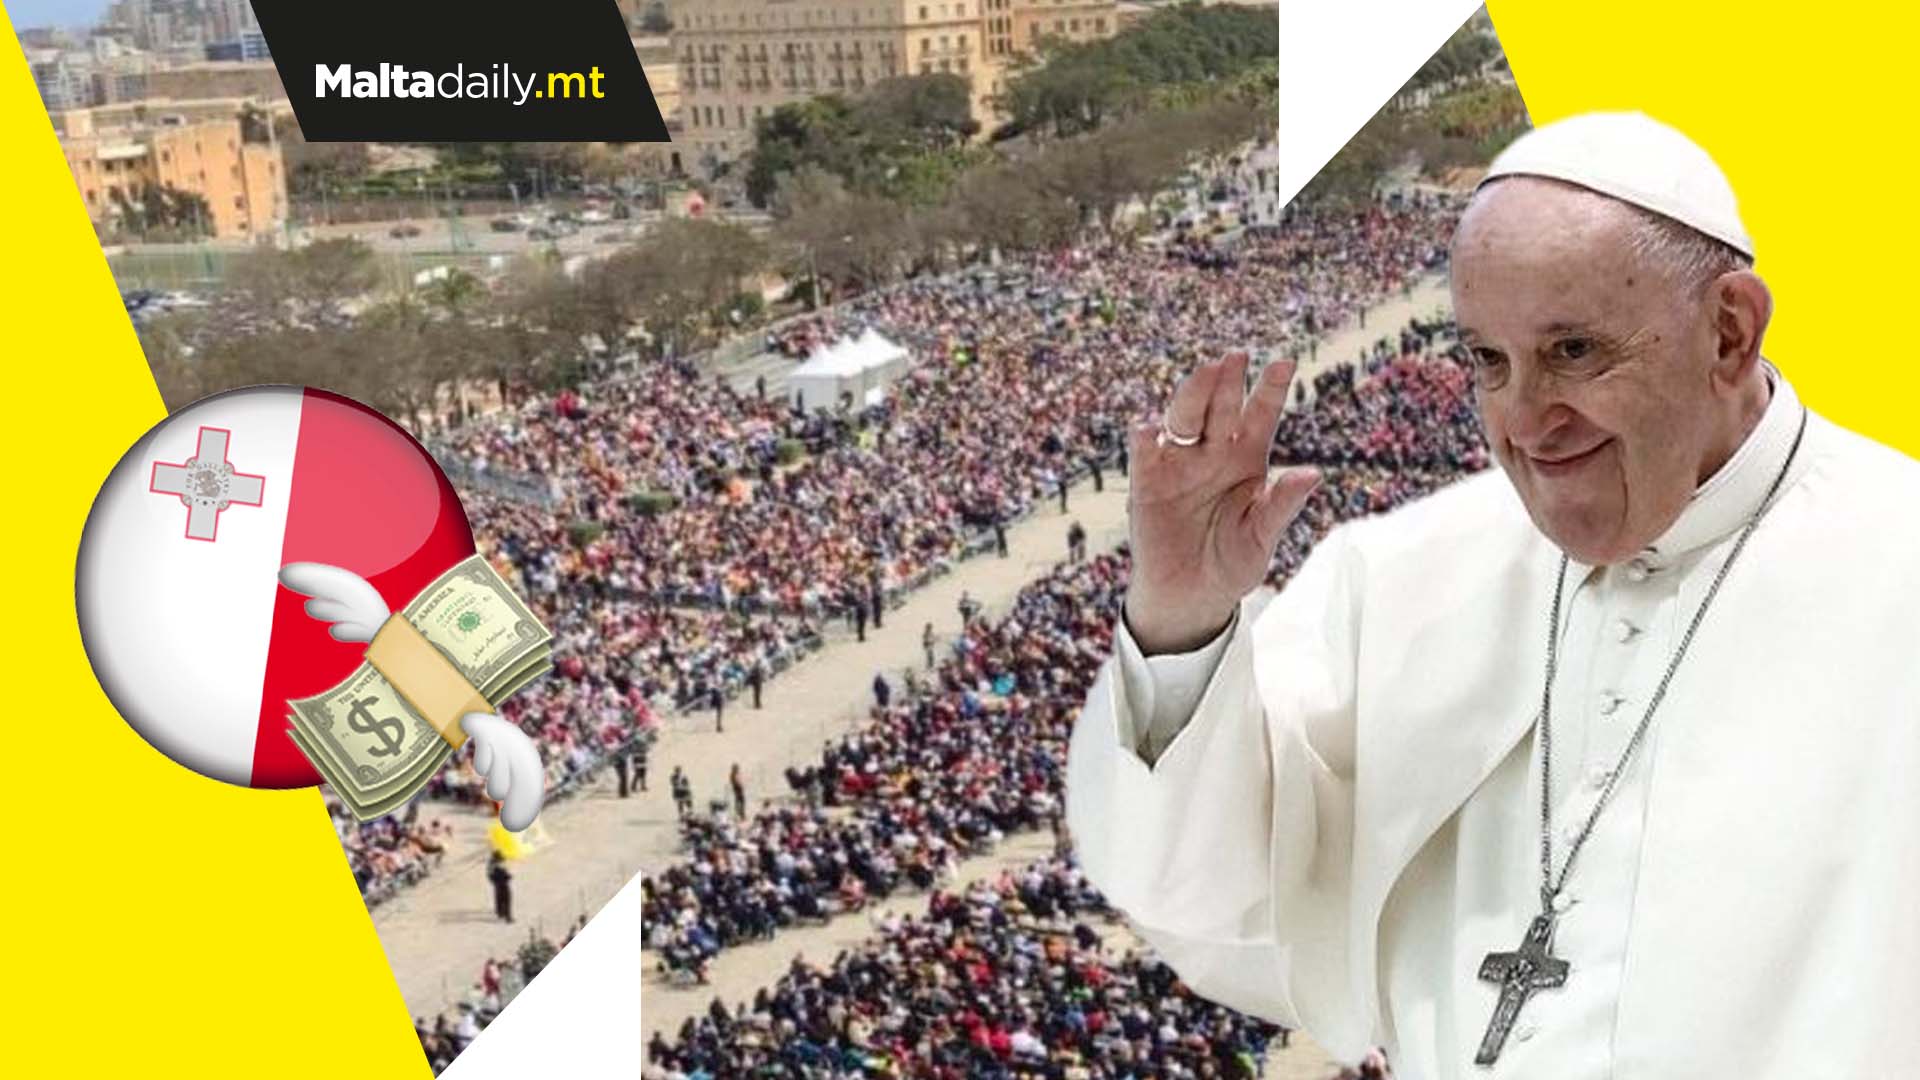 The Pope’s two-day visit to Malta cost €4,000,000